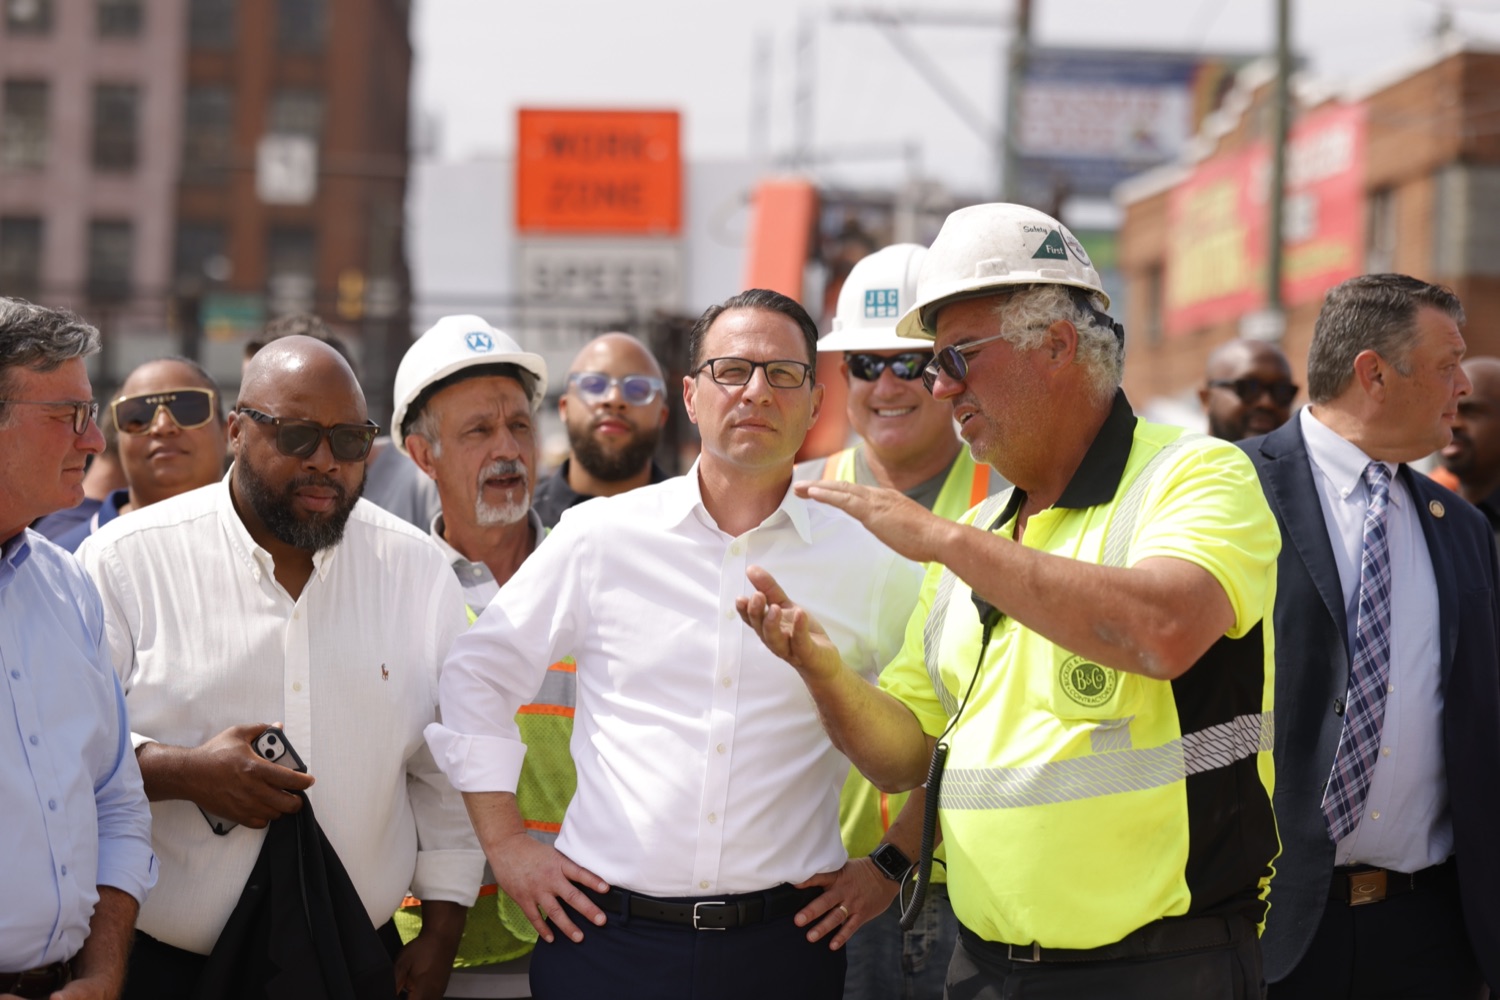 Governor Shapiro, PennDOT Secretary Carroll Announce I-95 Will Reopen This Weekend as the Shapiro Administrations Response Continues Ahead of Schedule<br><a href="https://filesource.amperwave.net/commonwealthofpa/photo/Image1.jpeg" target="_blank">⇣ Download Photo</a>